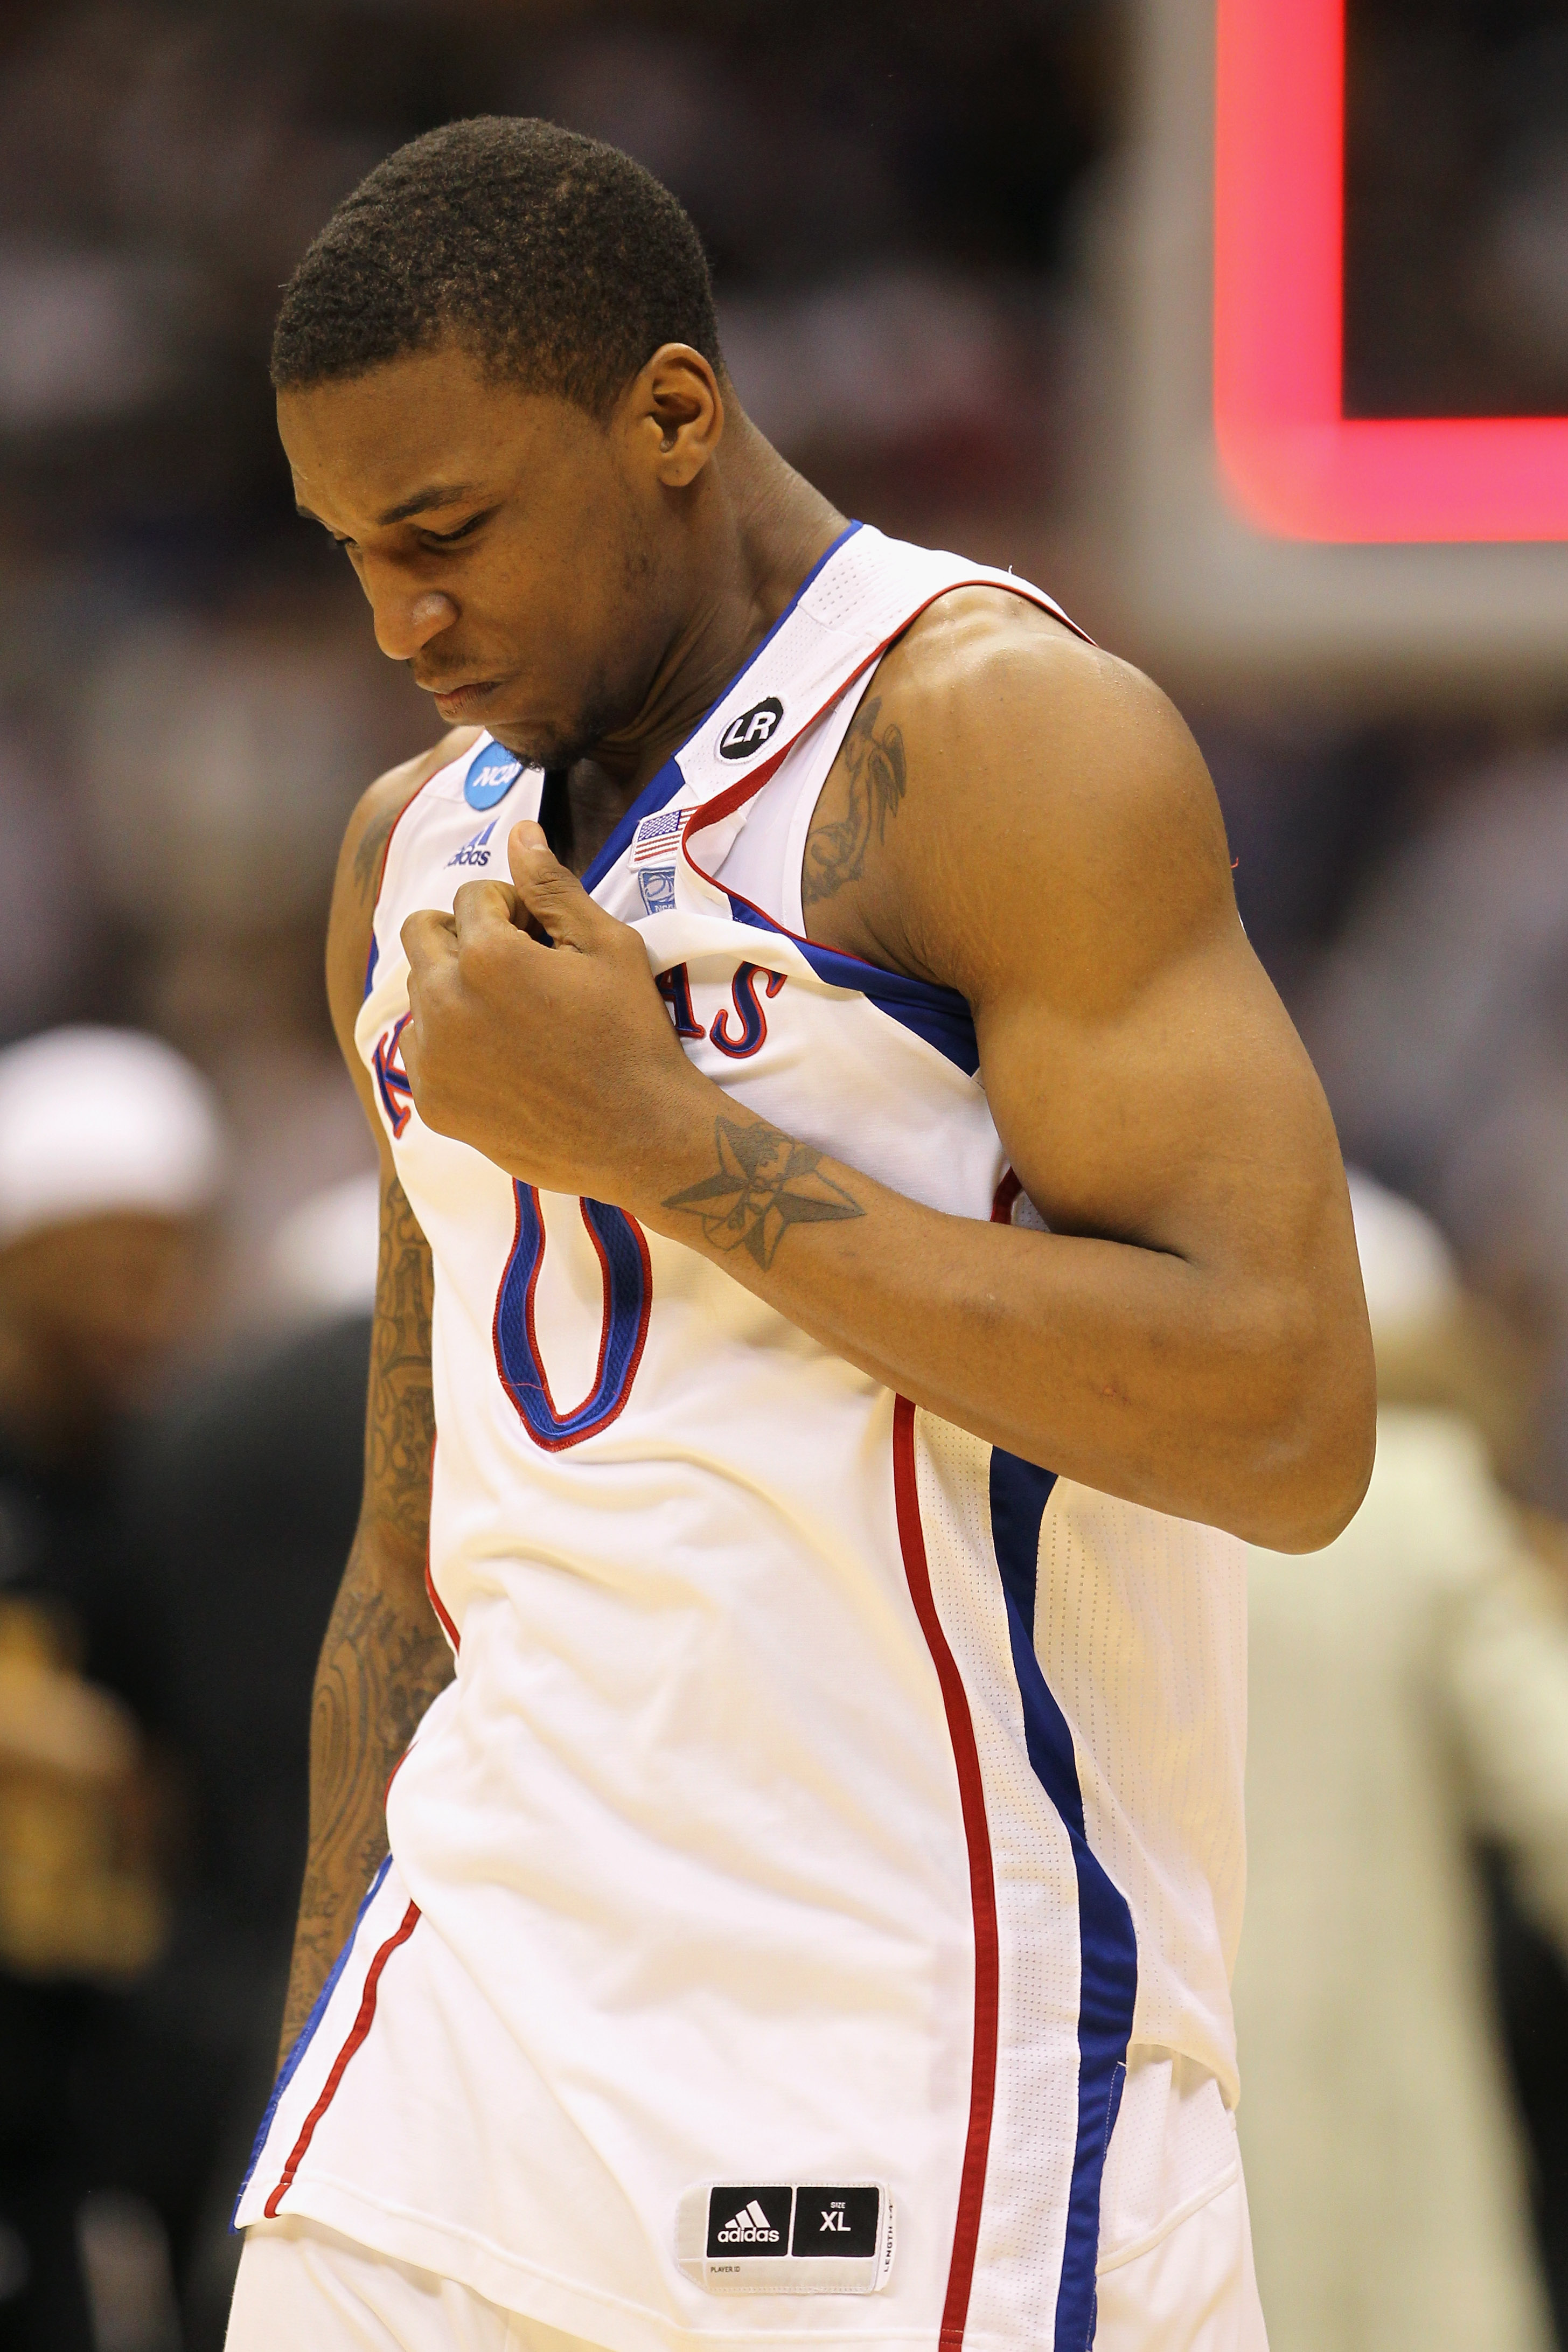 SAN ANTONIO, TX - MARCH 27:  Thomas Robinson #0 of the Kansas Jayhawks reacts after the southwest regional final of the 2011 NCAA men's basketball tournament against the Virginia Commonwealth Rams at the Alamodome on March 27, 2011 in San Antonio, Texas.